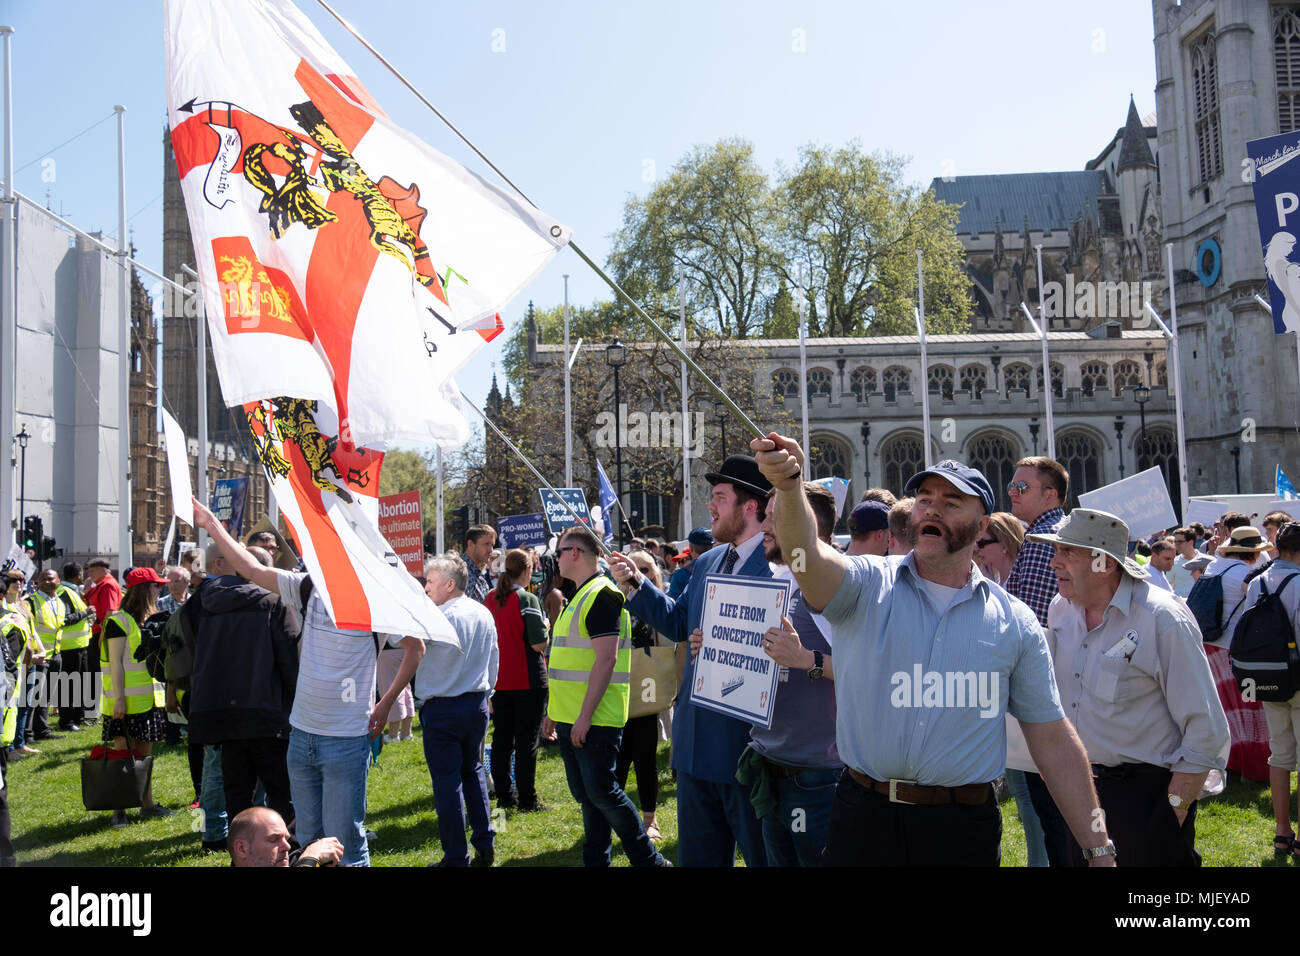 London, UK, 5th May 2018, Members of the March for Life UK held a march through central London. Several males wave flags in Parliment Suare at the end of the march Credit: adrian looby/Alamy Live News Stock Photo